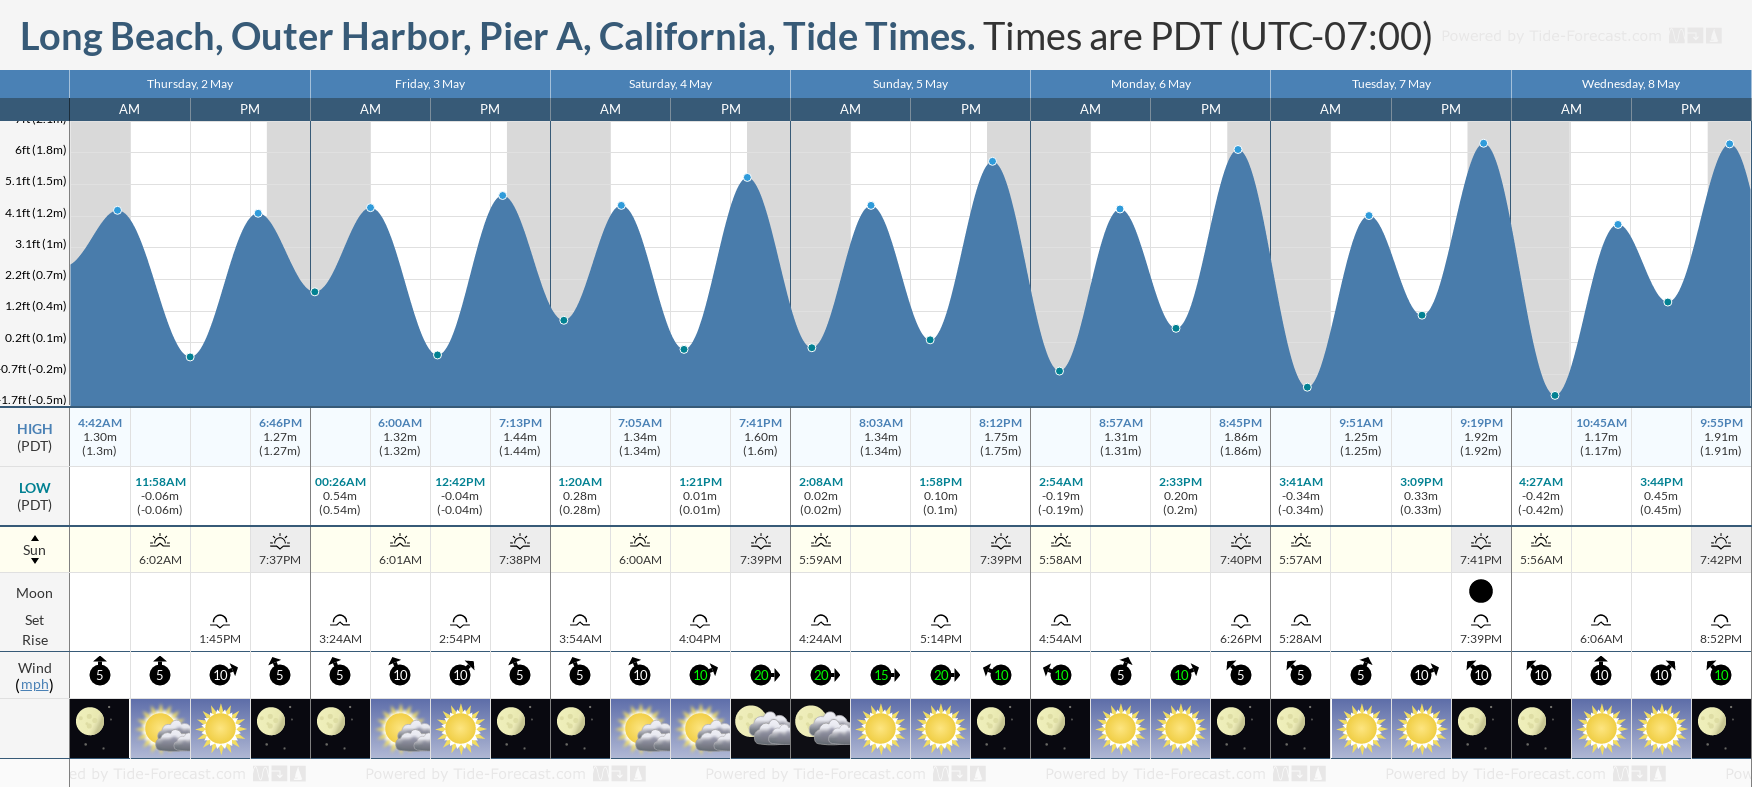 Long Beach, Outer Harbor, Pier A, California Tide Chart including high and low tide tide times for the next 7 days